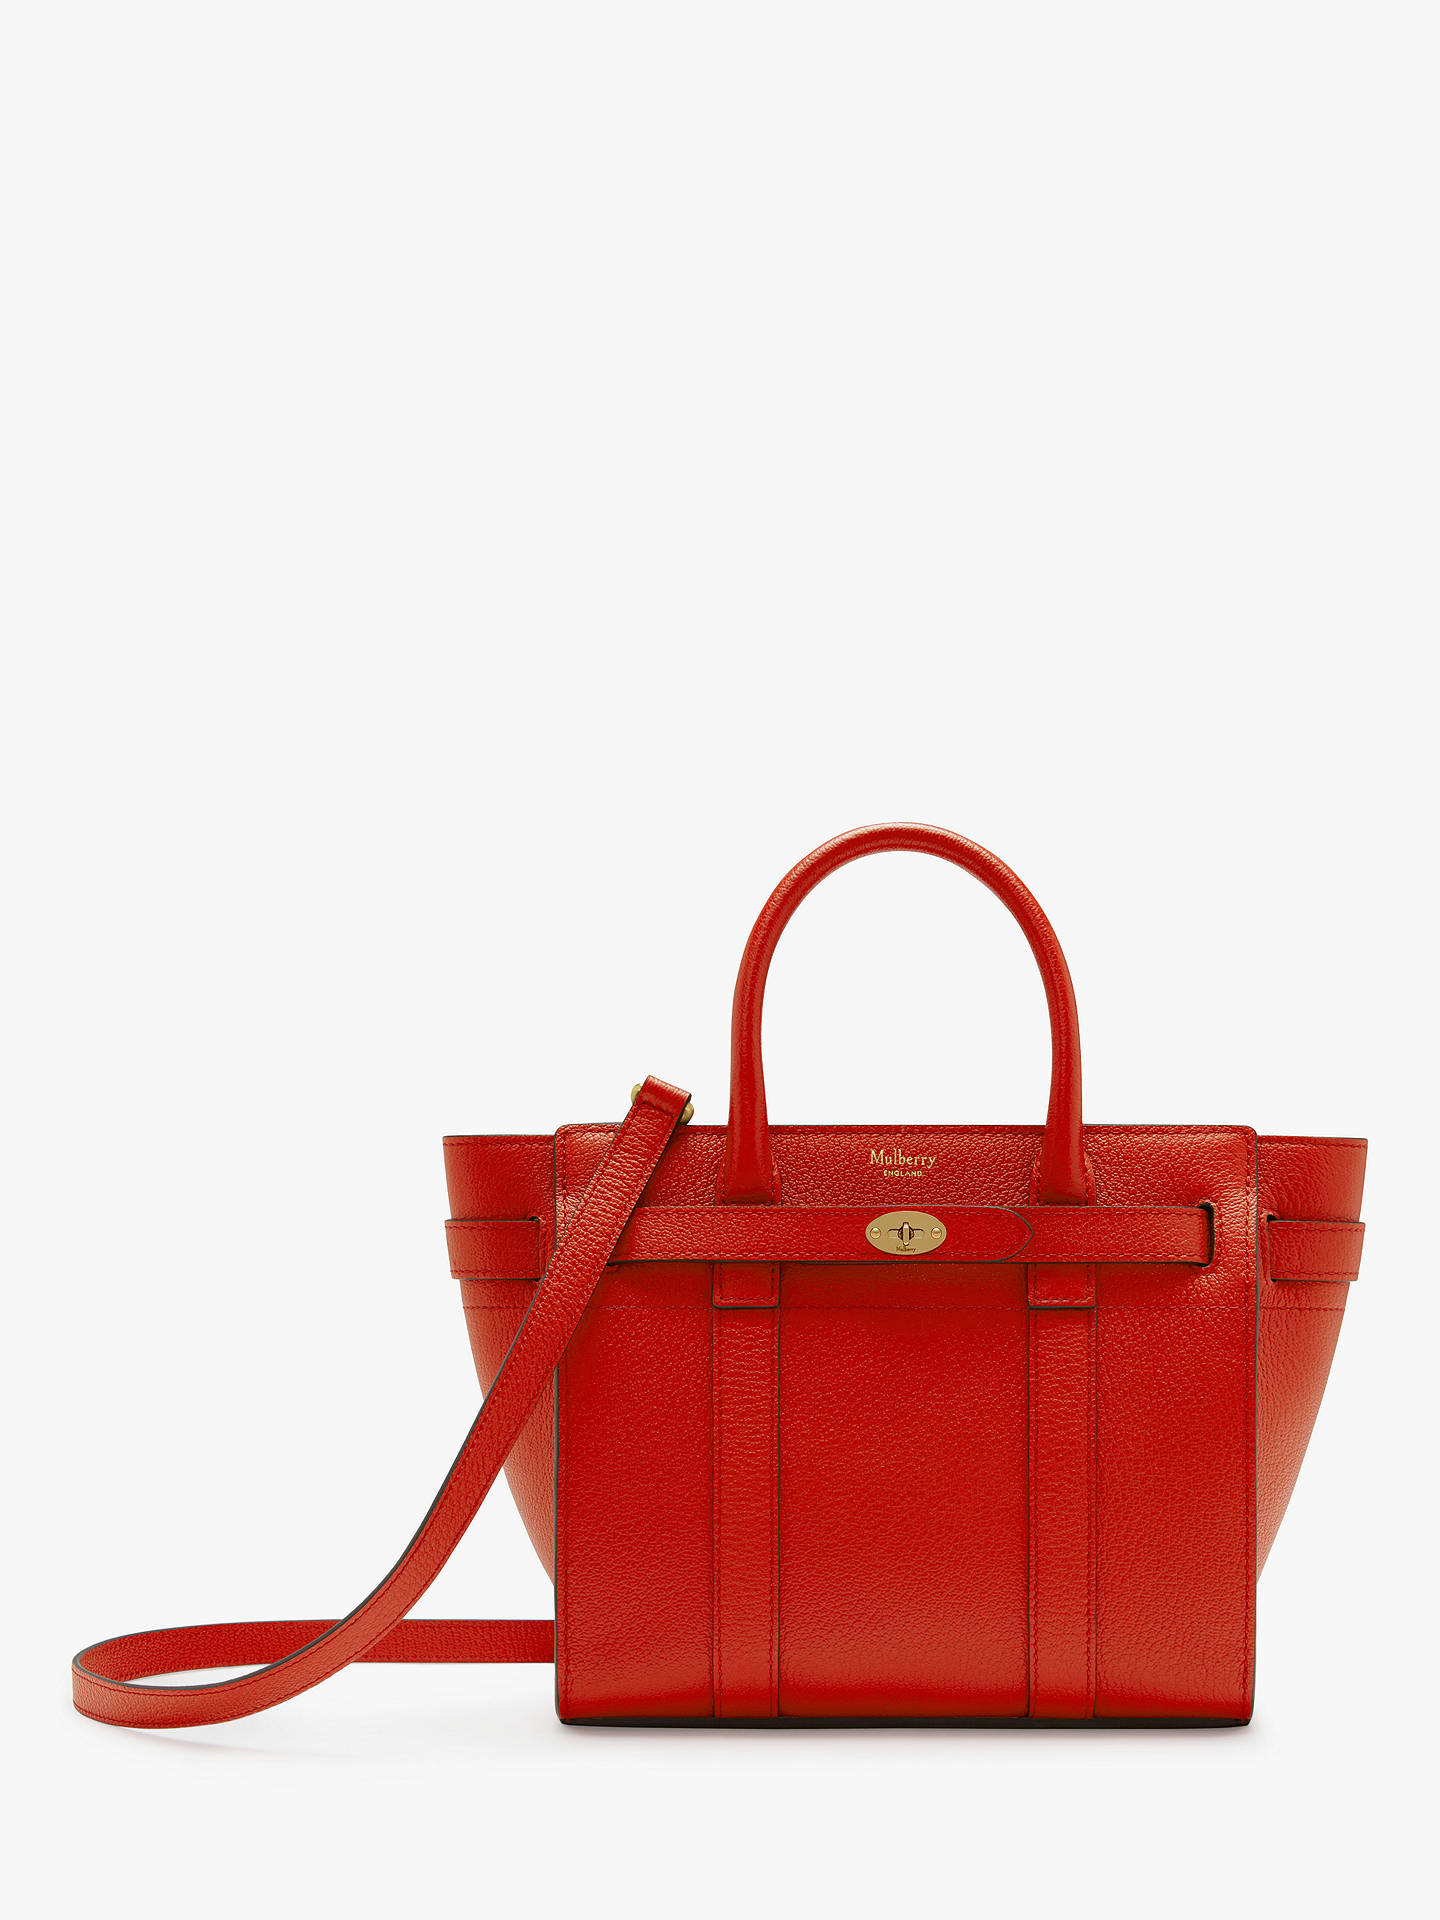 Mulberry Mini Bayswater Zipped Classic Grain Leather Tote Bag at John Lewis & Partners